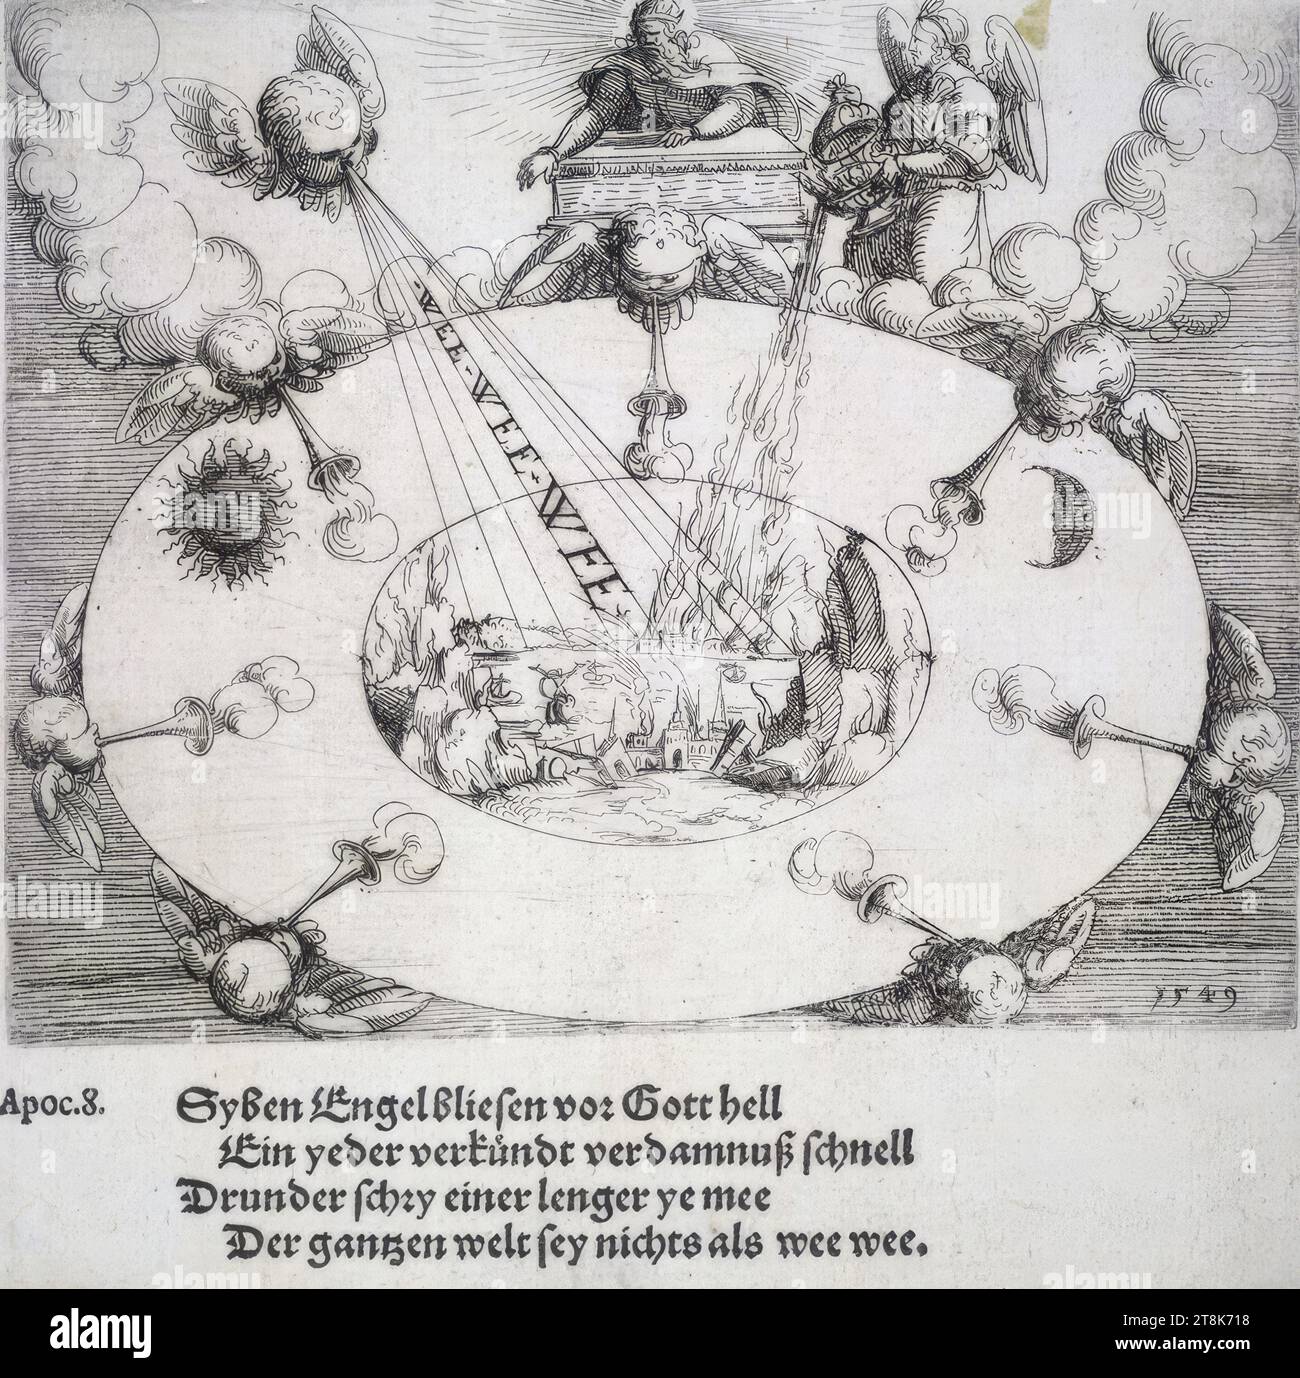 The Last Judgment, Peter Pereny, preface and entrance of the Concordantzen old and news Testaments, Vienna 1550, Augustin Hirschvogel, Nuremberg 1503 - 1553 Vienna, 1549, prints, etching, type printing, Austria Stock Photo